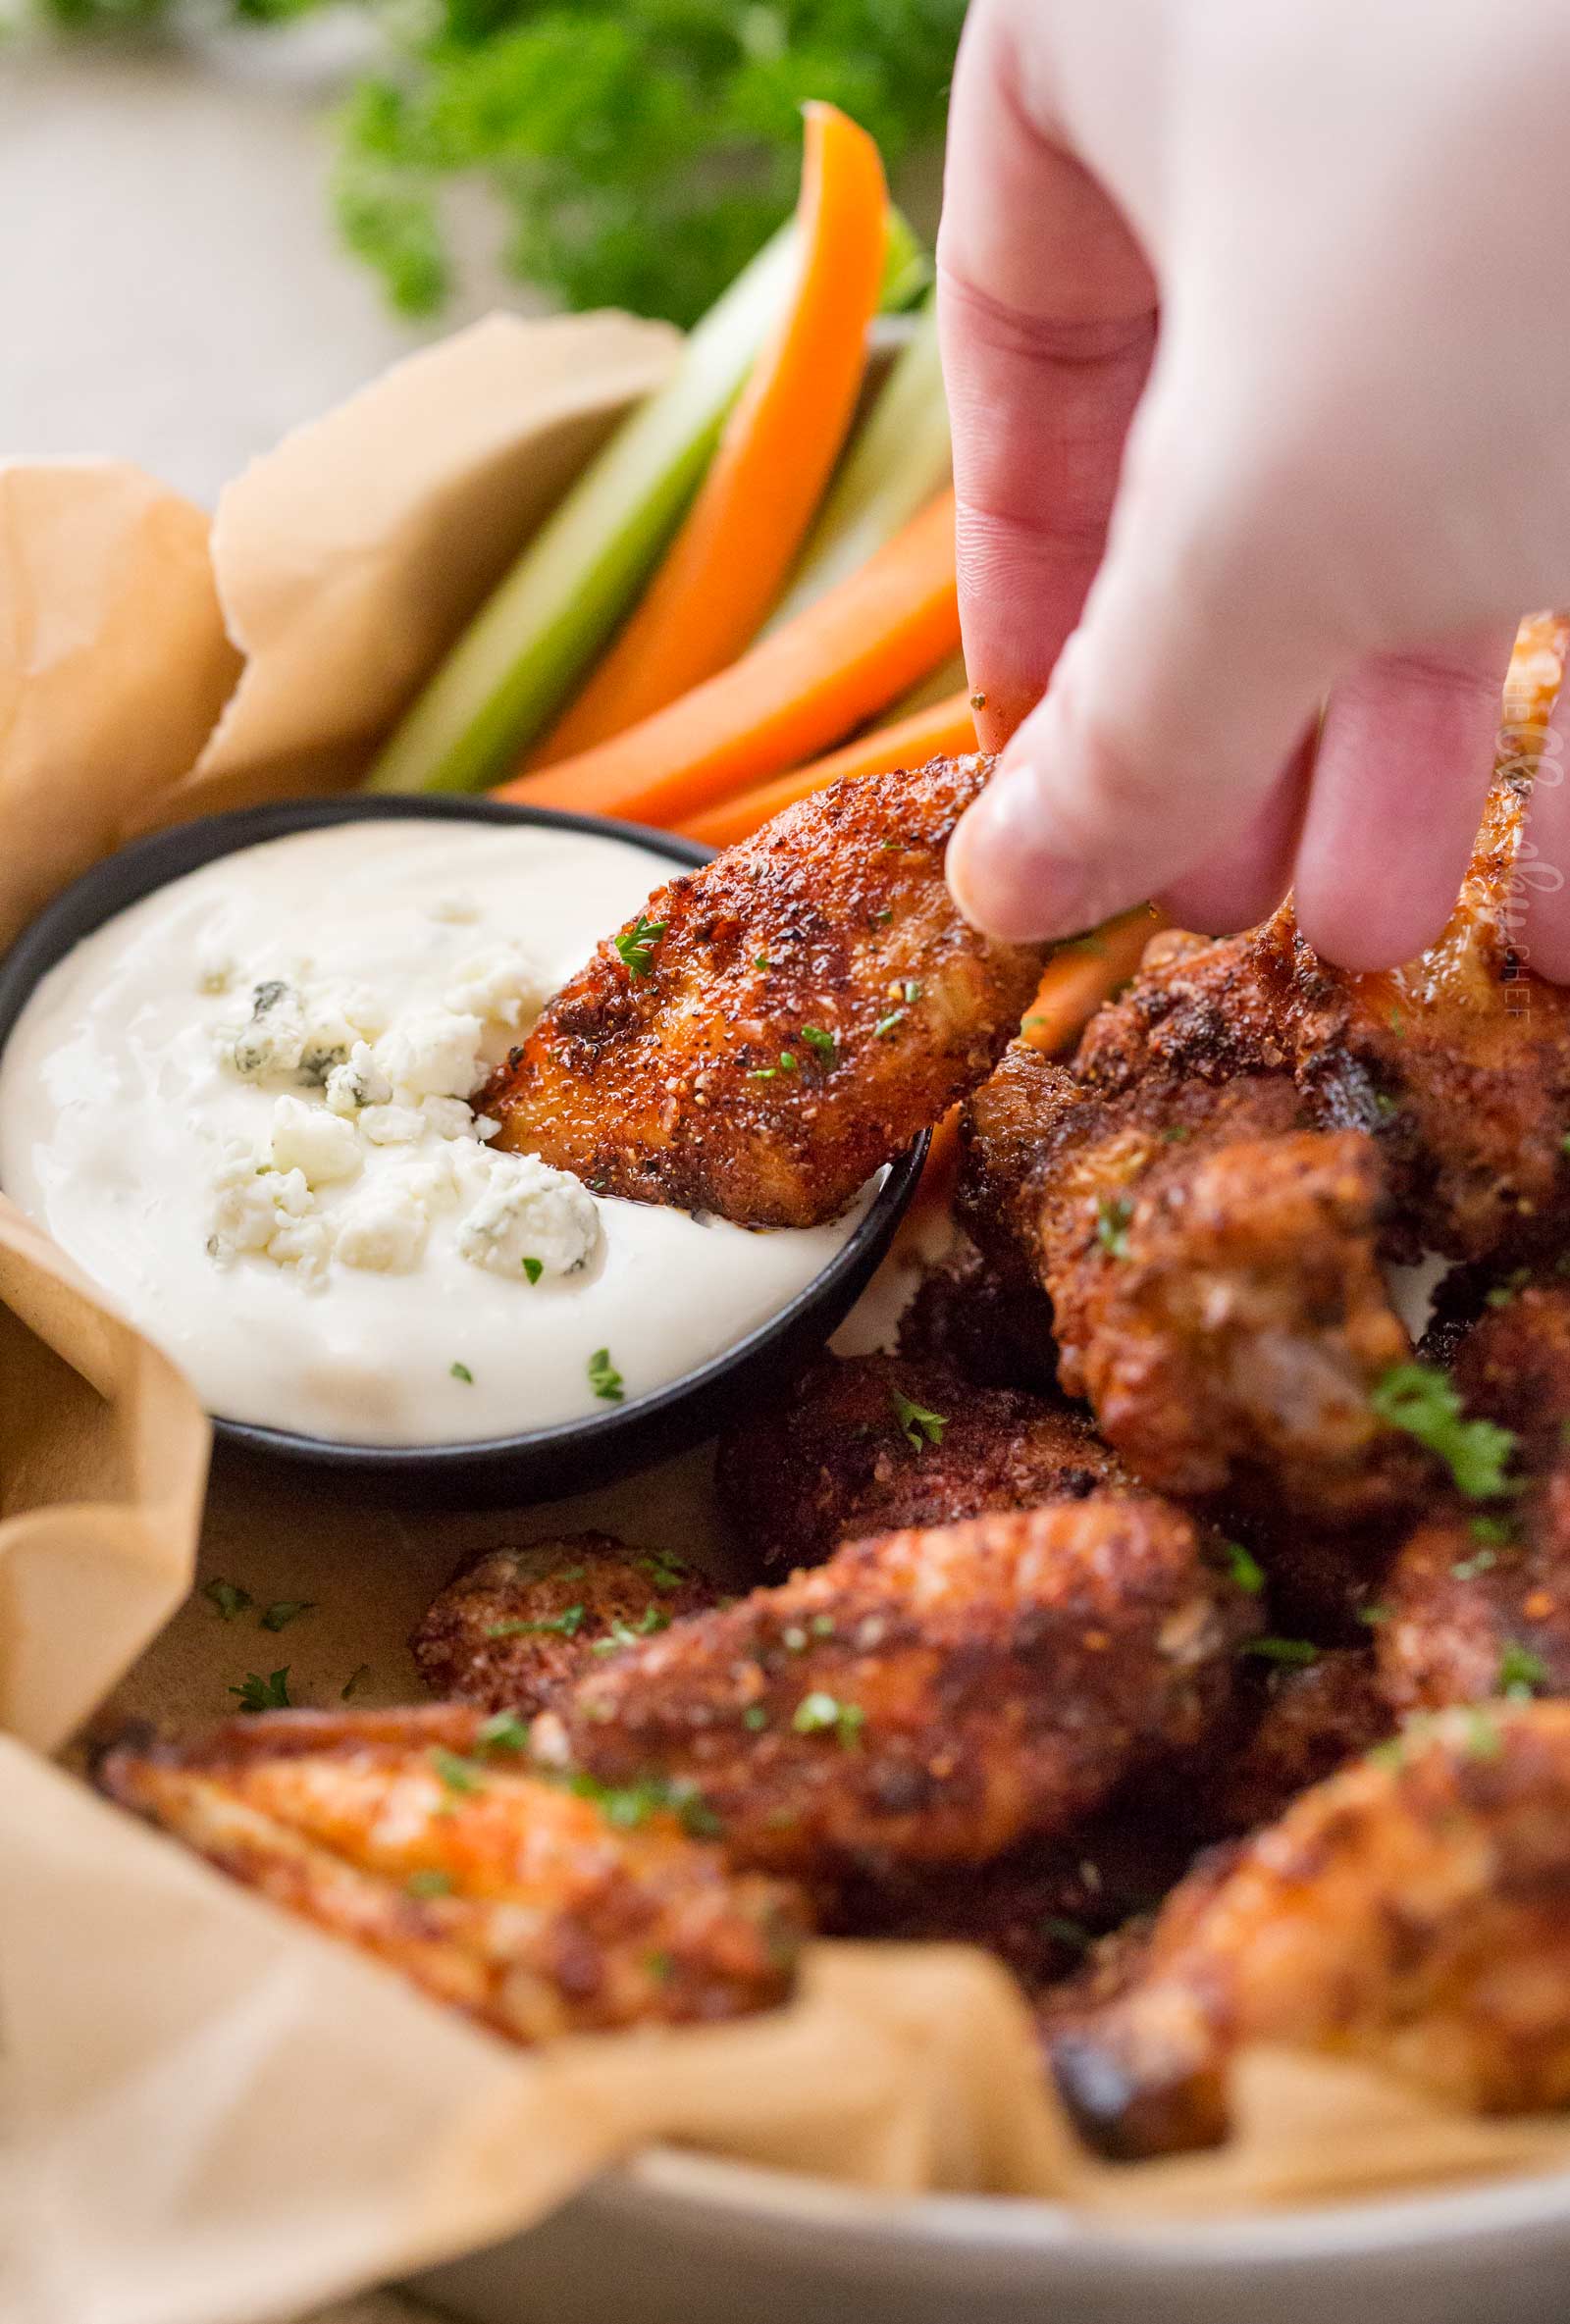 Baked chicken wings dipped in gorgonzola dipping sauce